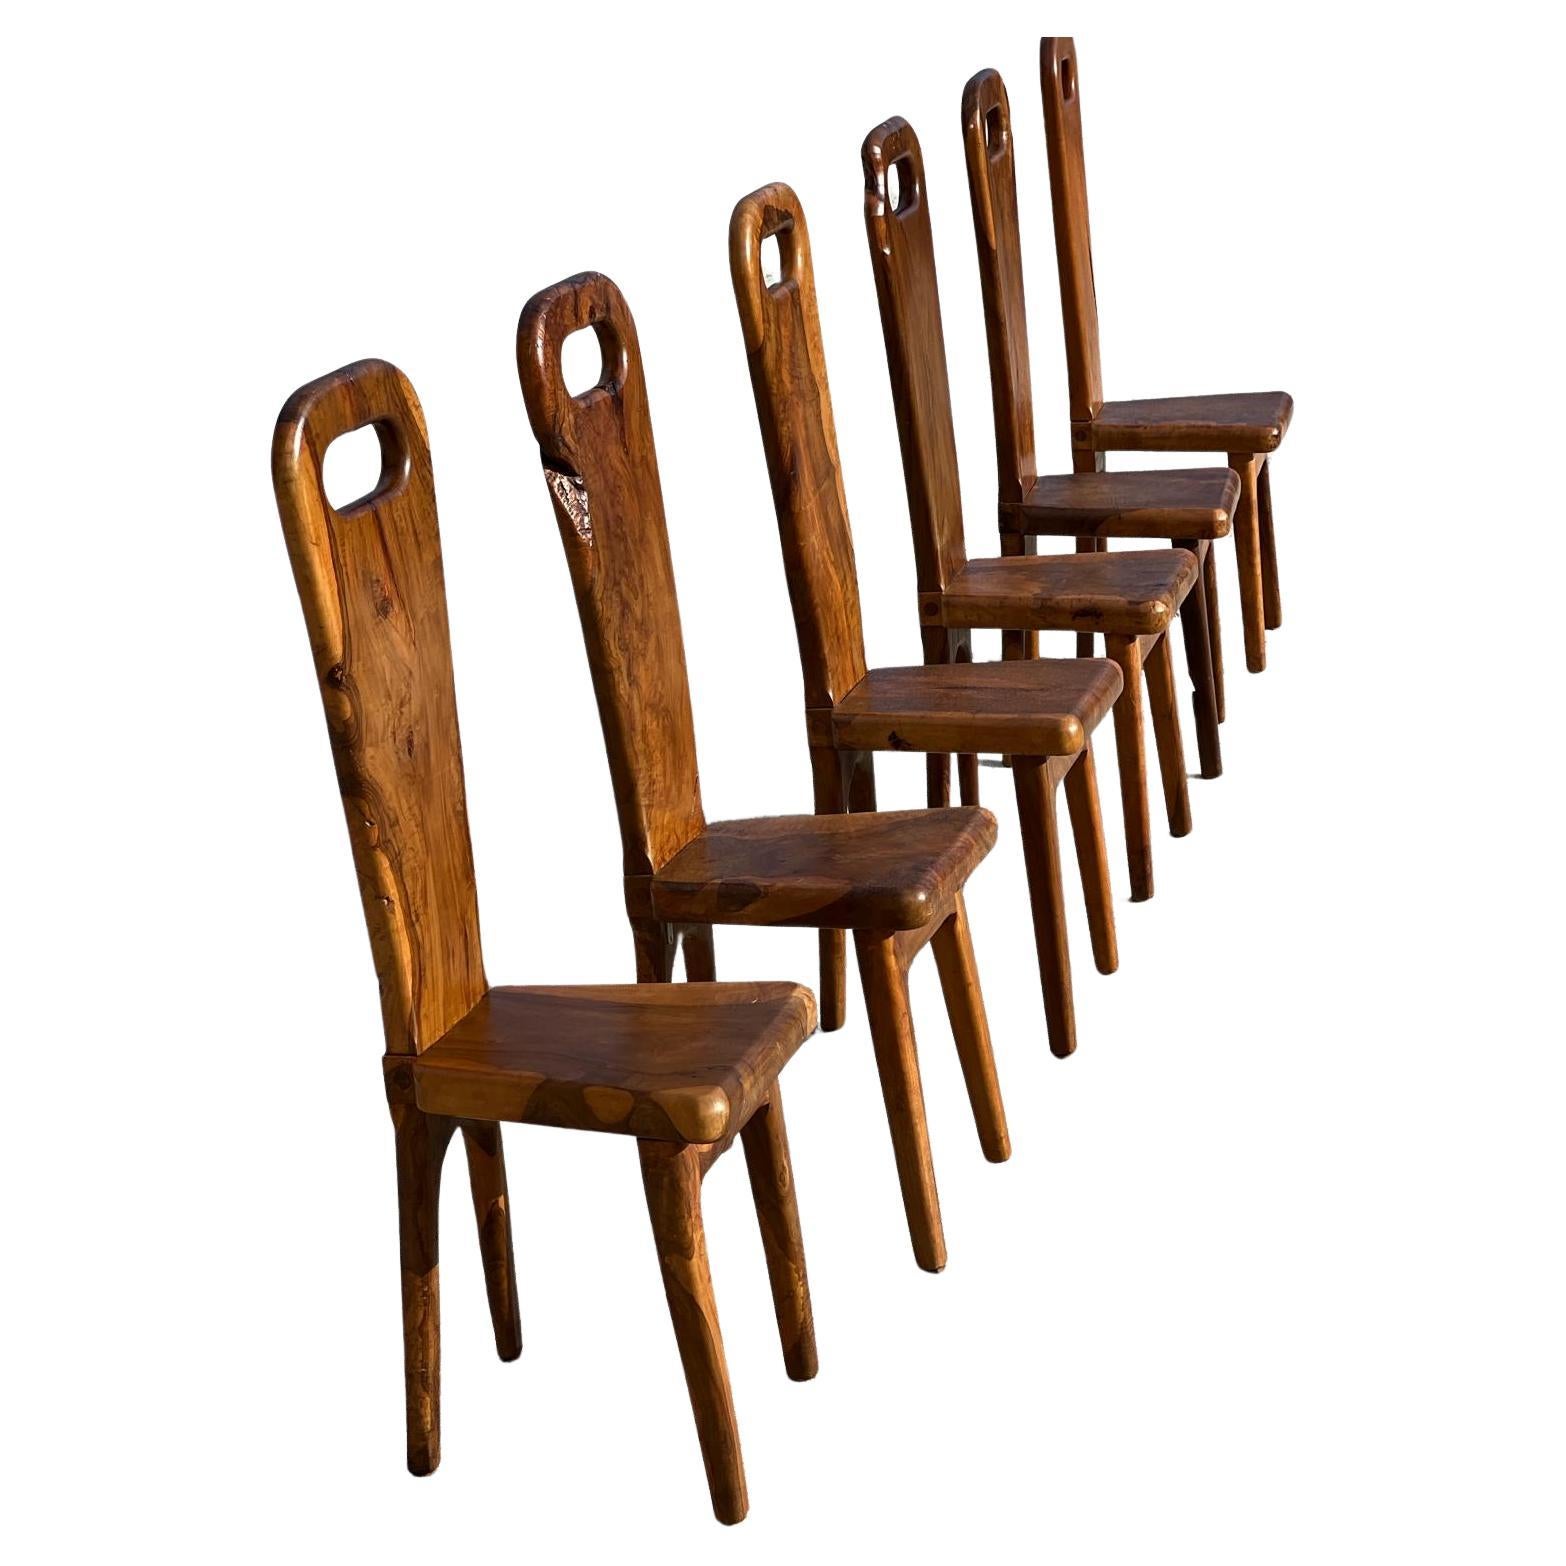 Sculptural solid olive wood high-back chairs French work 1960, set of 6 